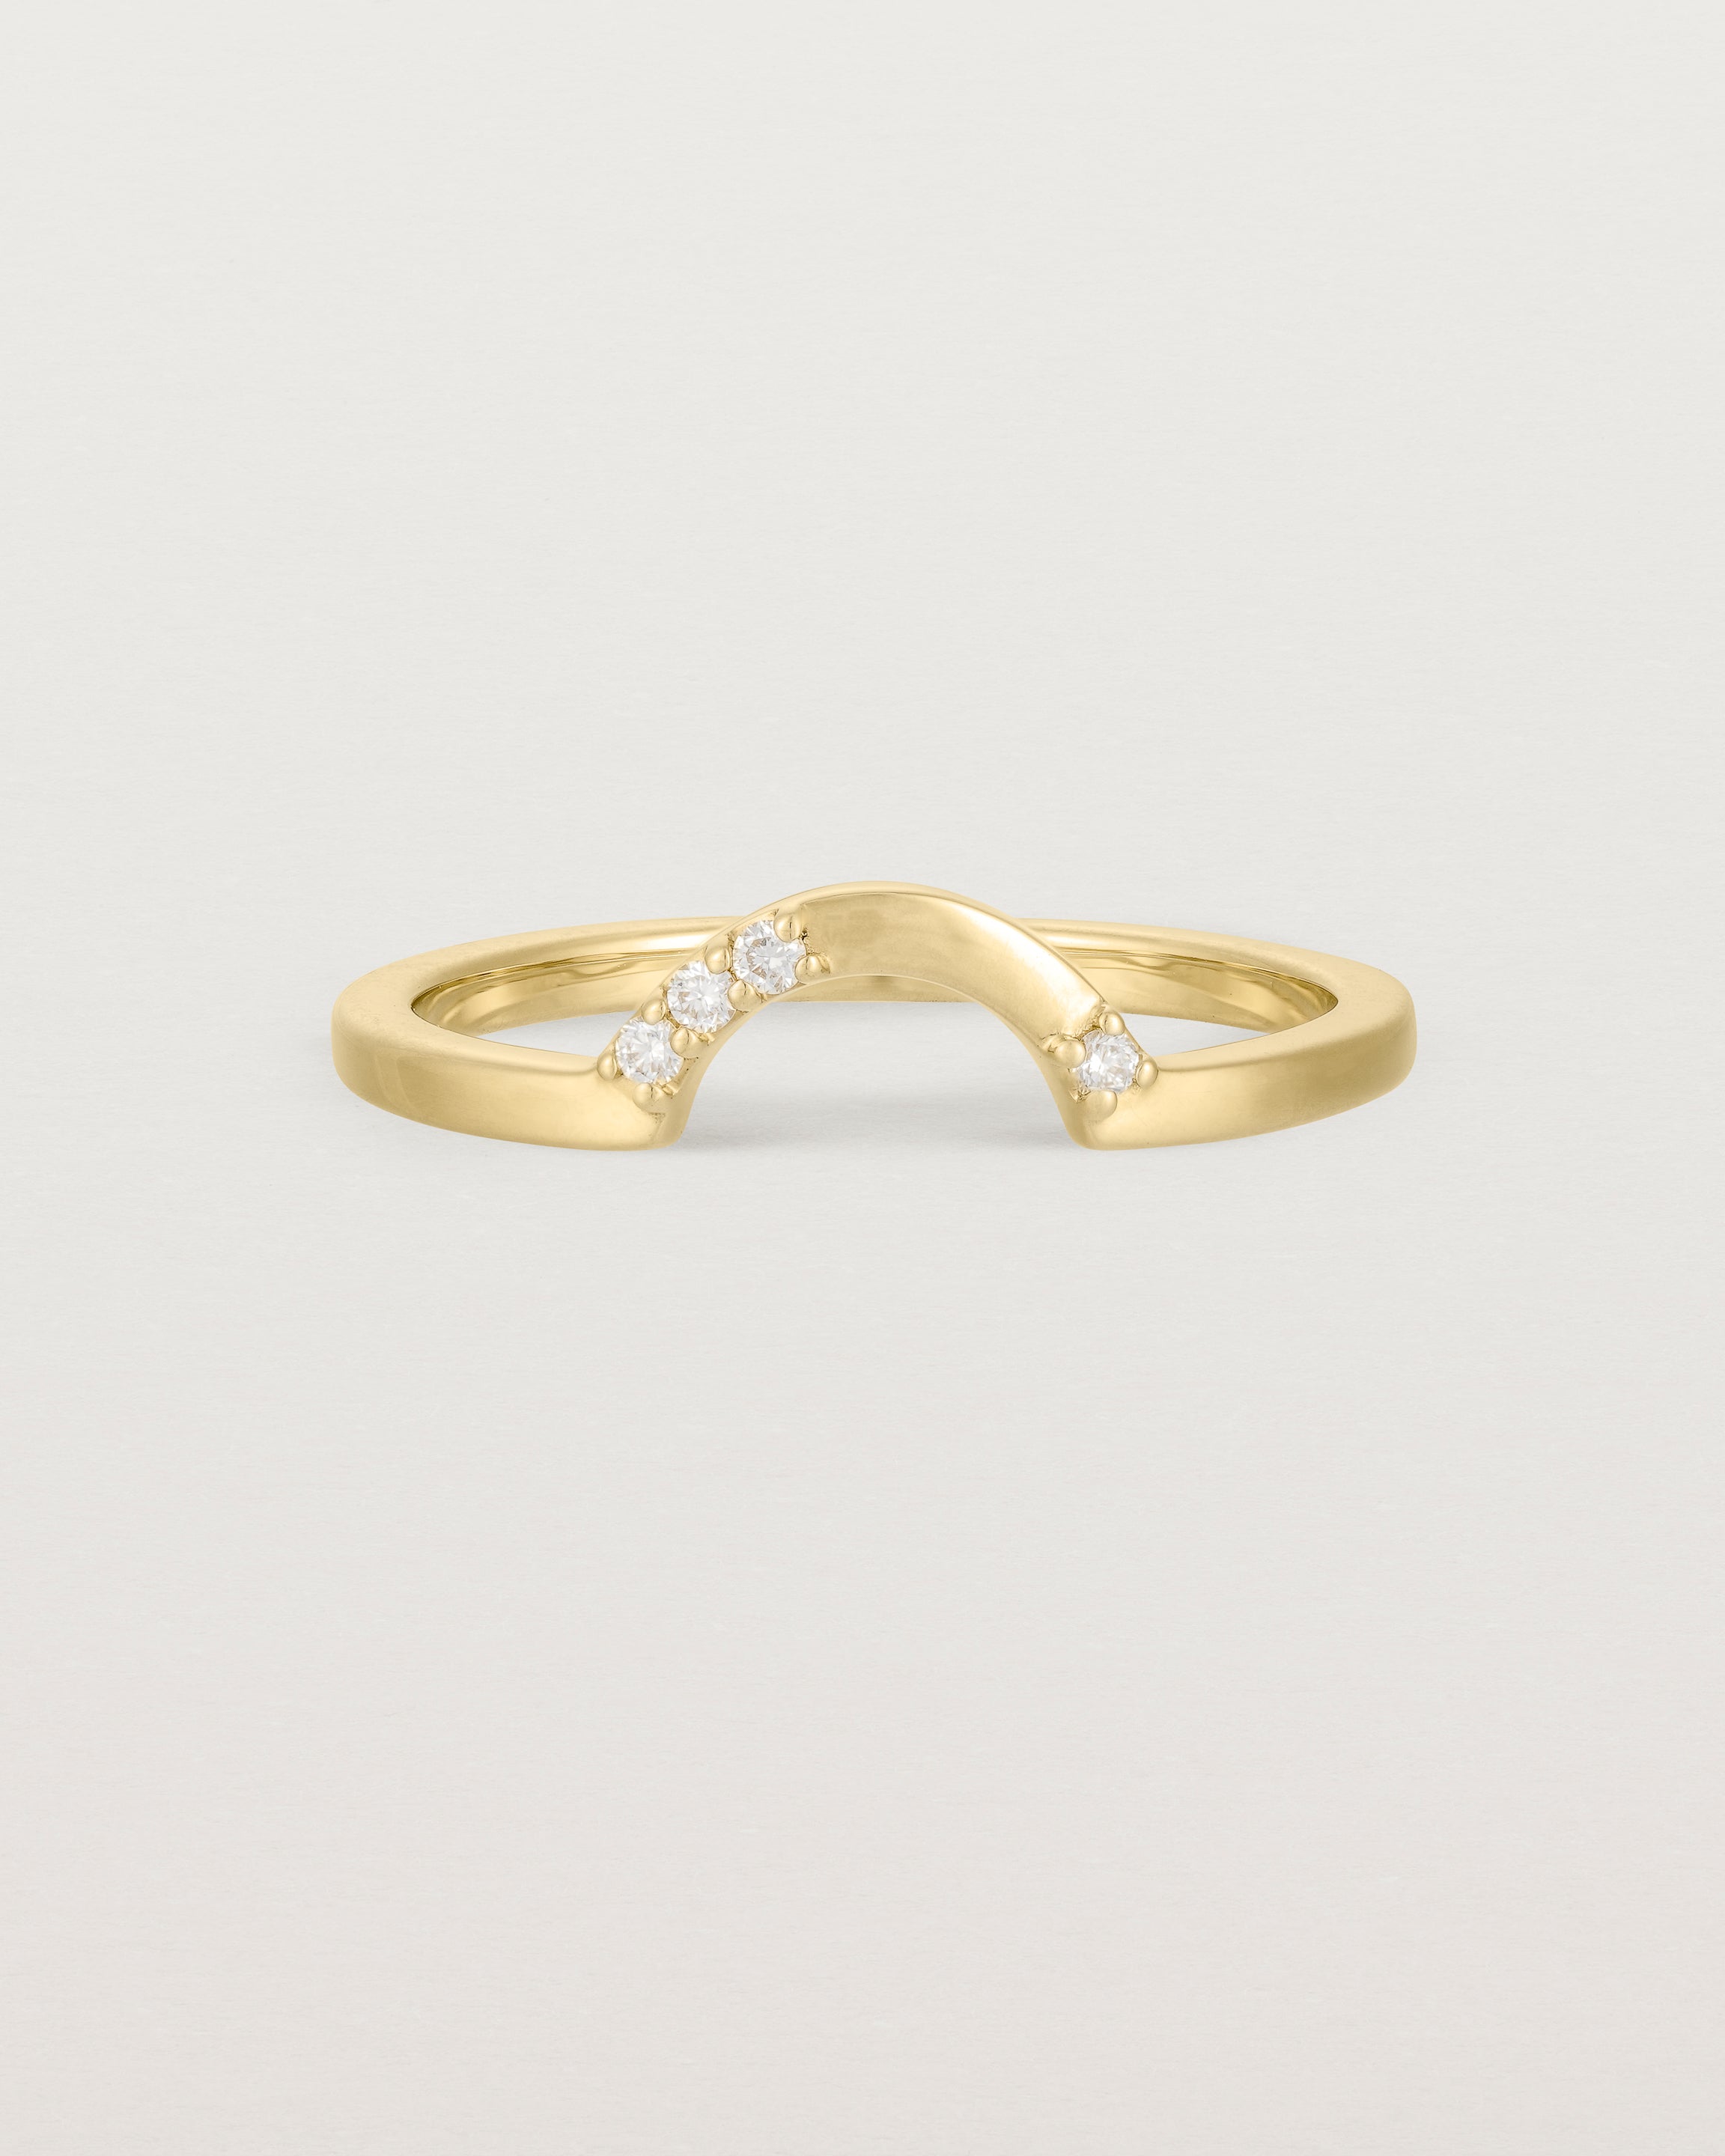 Fit two of a classic arc ring featuring scattered white diamonds, crafted in yellow gold